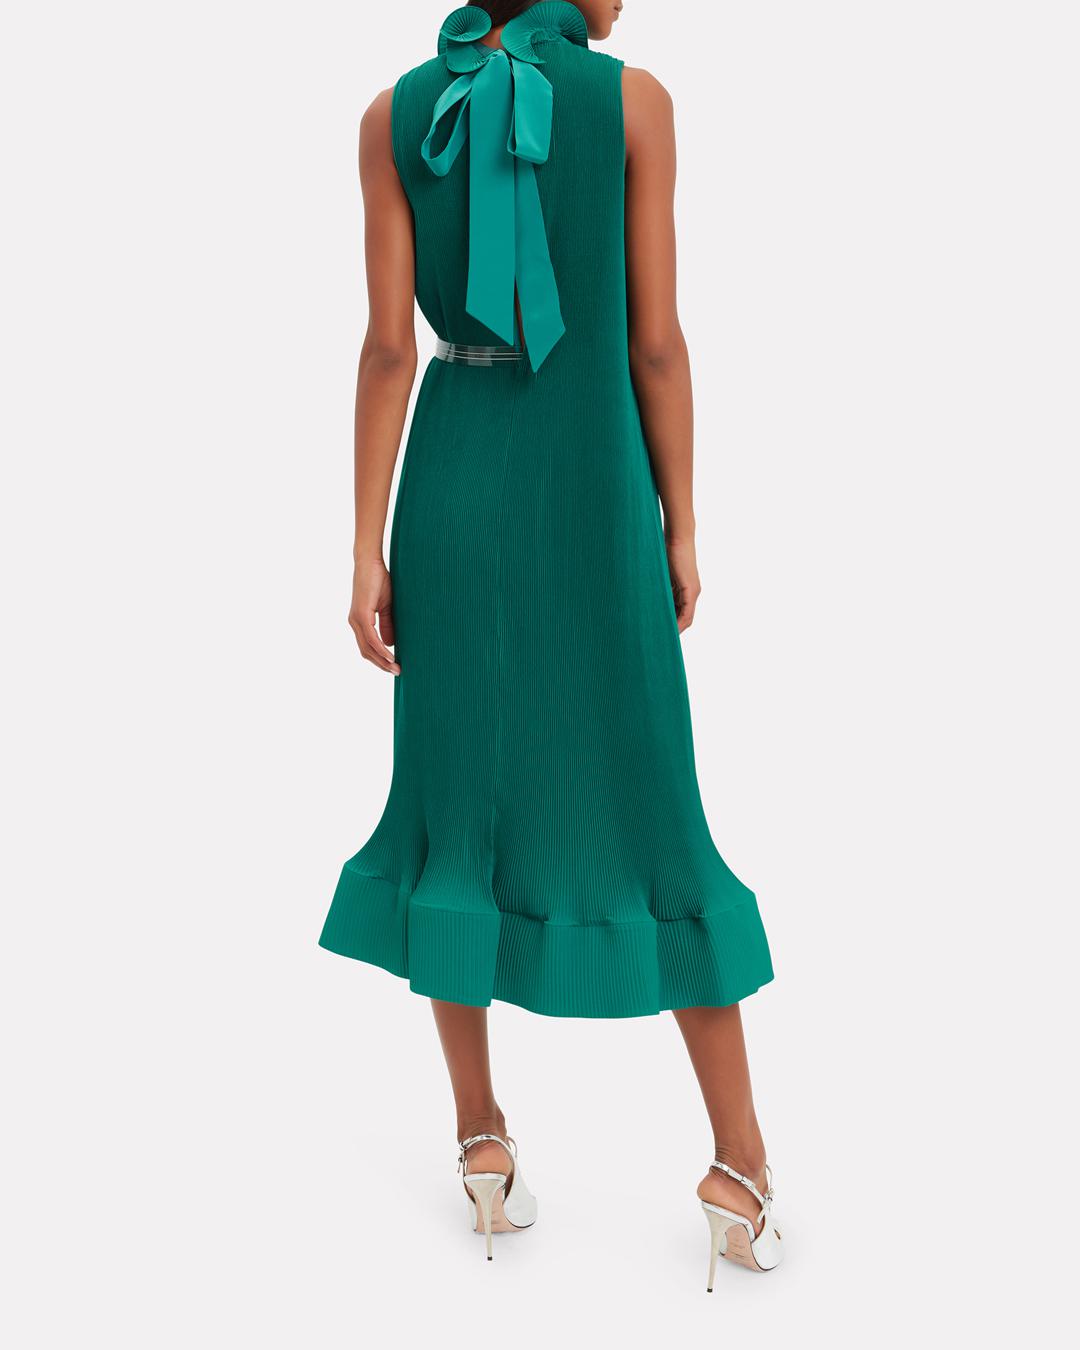 Tibi Synthetic Pleated Belted Green Dress | Lyst